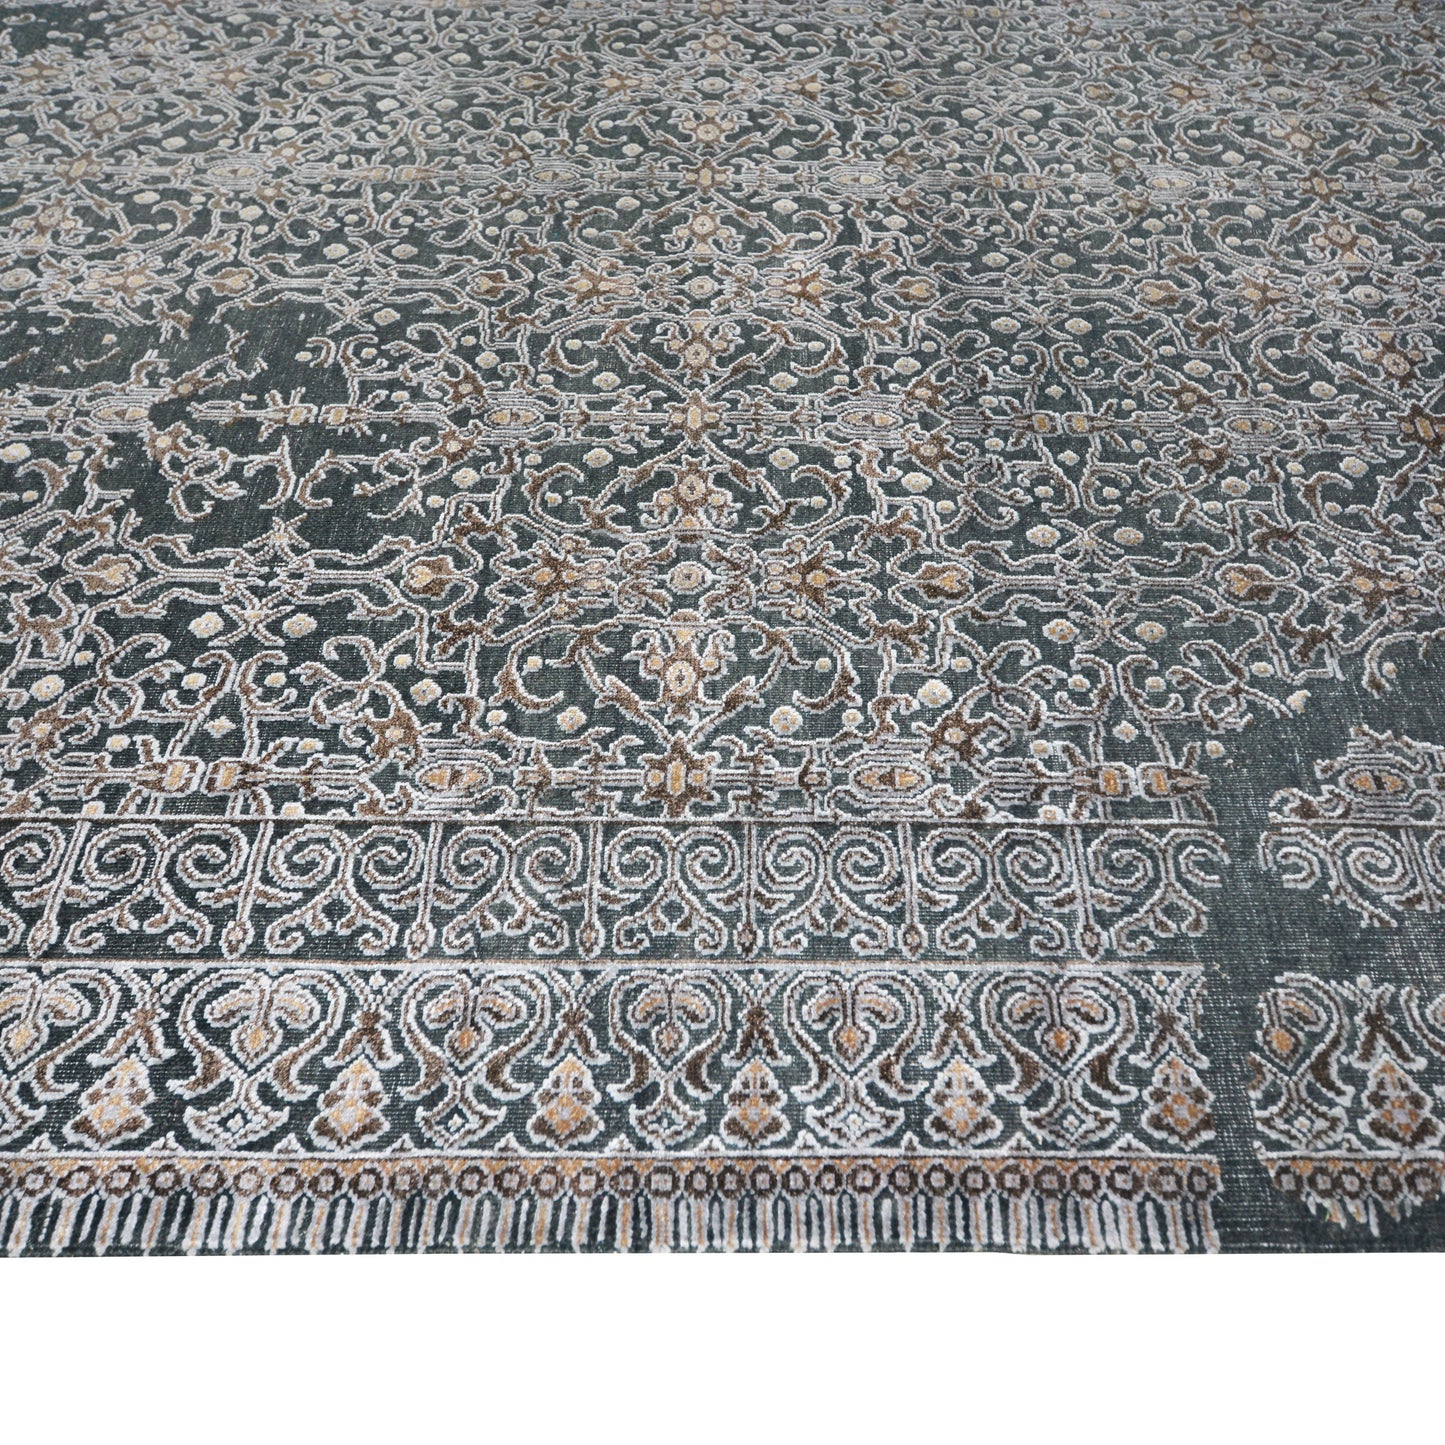 Get trendy with Erased Silver, Black and Brown Transitional Erased Handknotted Area Rug - Contemporary Rugs available at Jaipur Oriental Rugs. Grab yours for $4310.00 today!